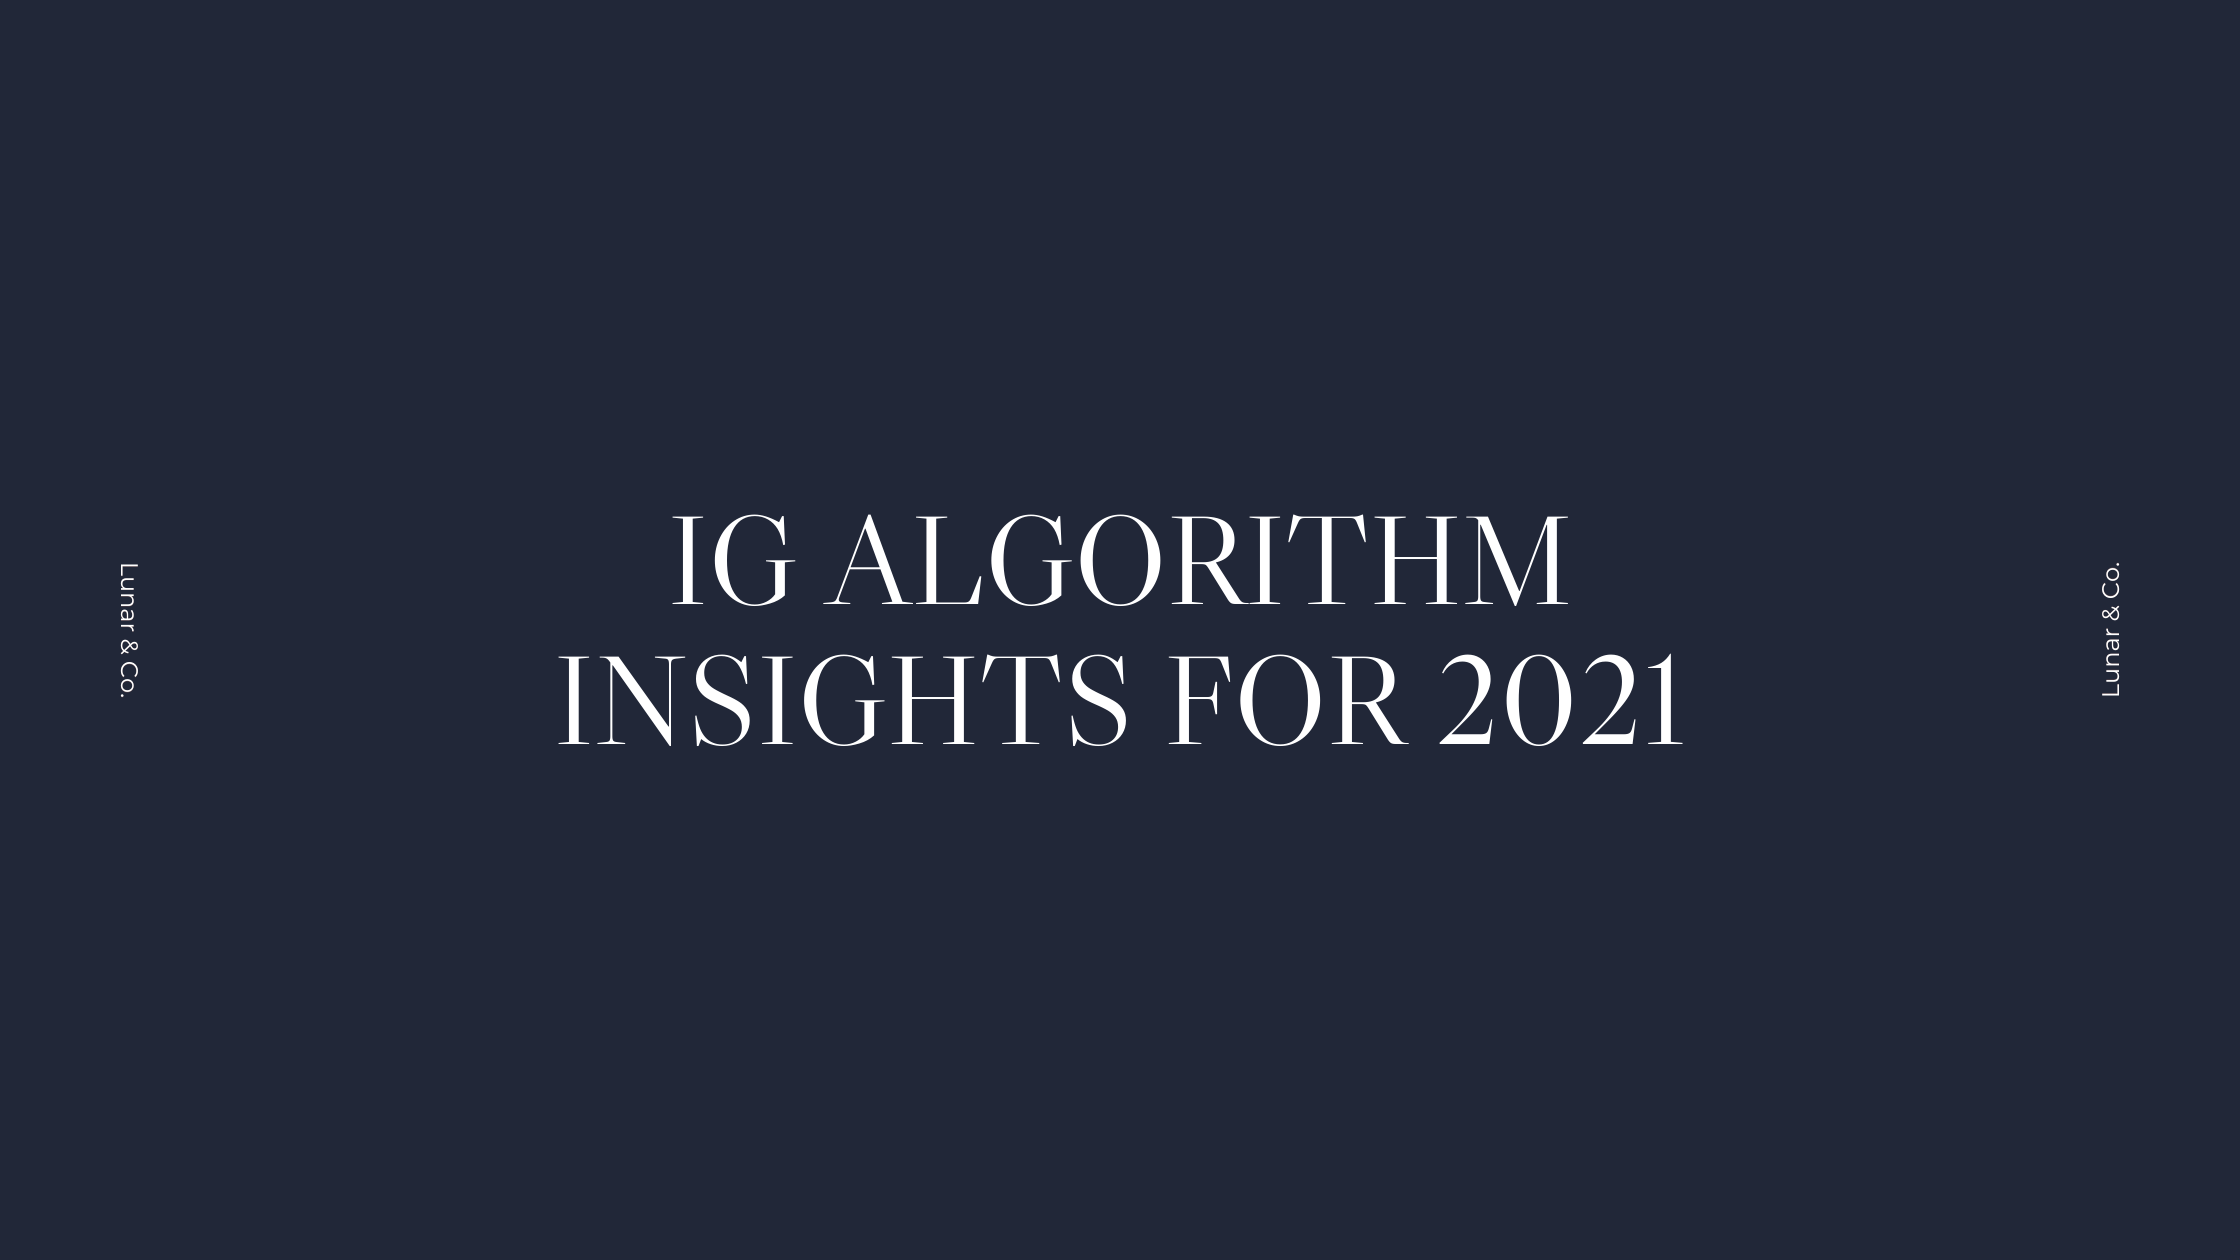 IG insights for 2021